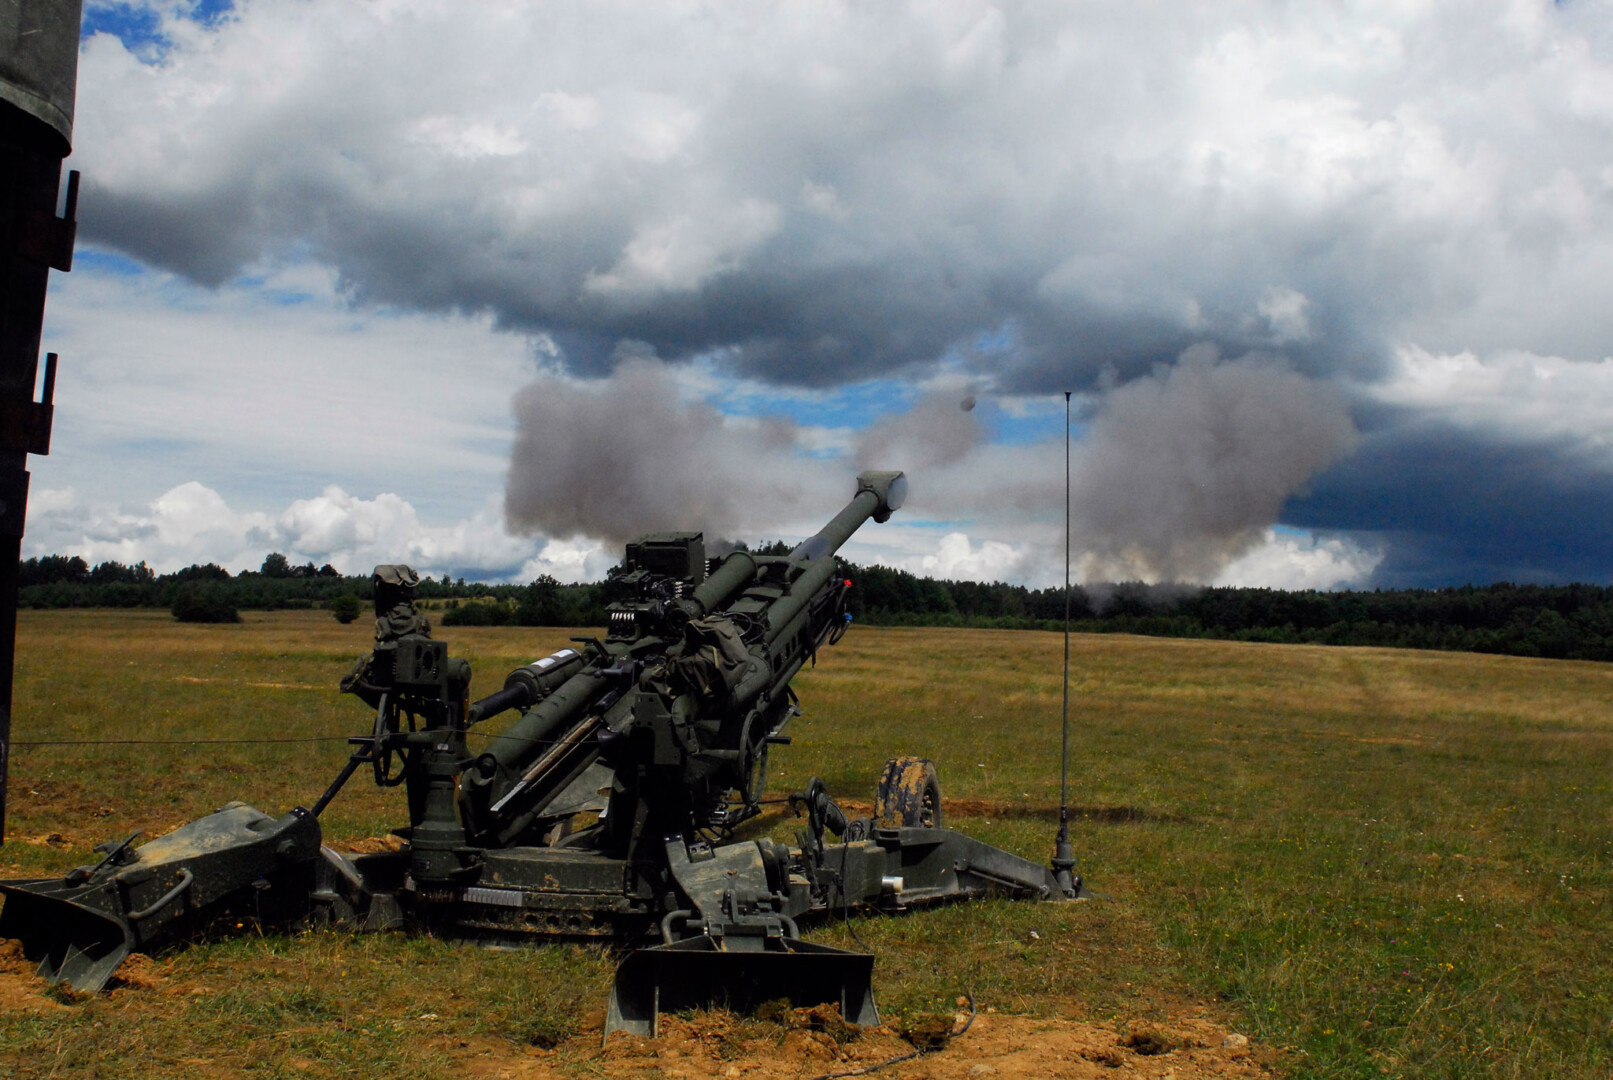 M777 Howitzer / Archivbild /  by U.S. Army Europe is marked with Public Domain Mark 1.0. https://creativecommons.org/licenses